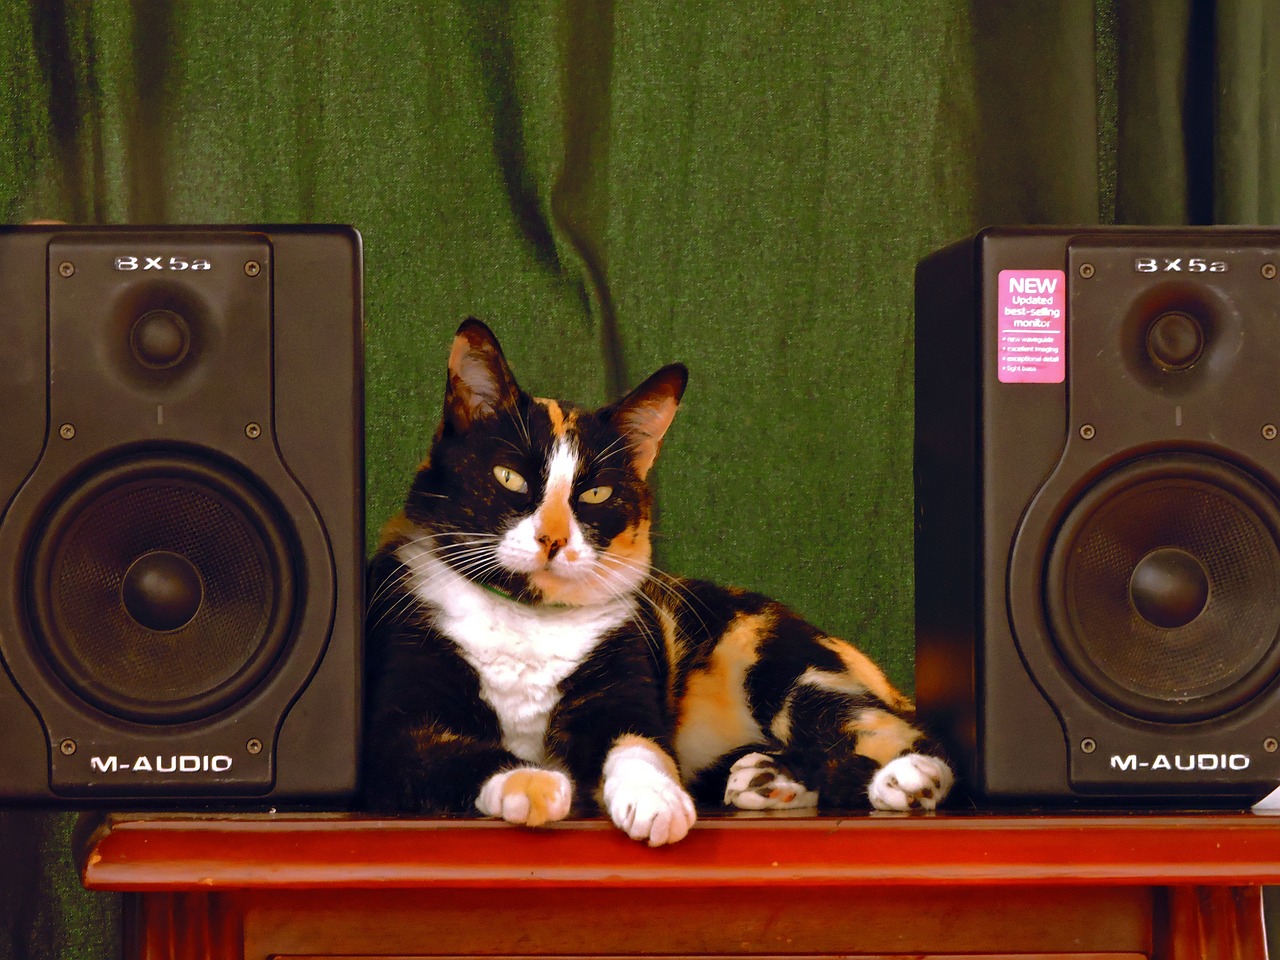 Calico cat sitting on a shelf between two speakers.